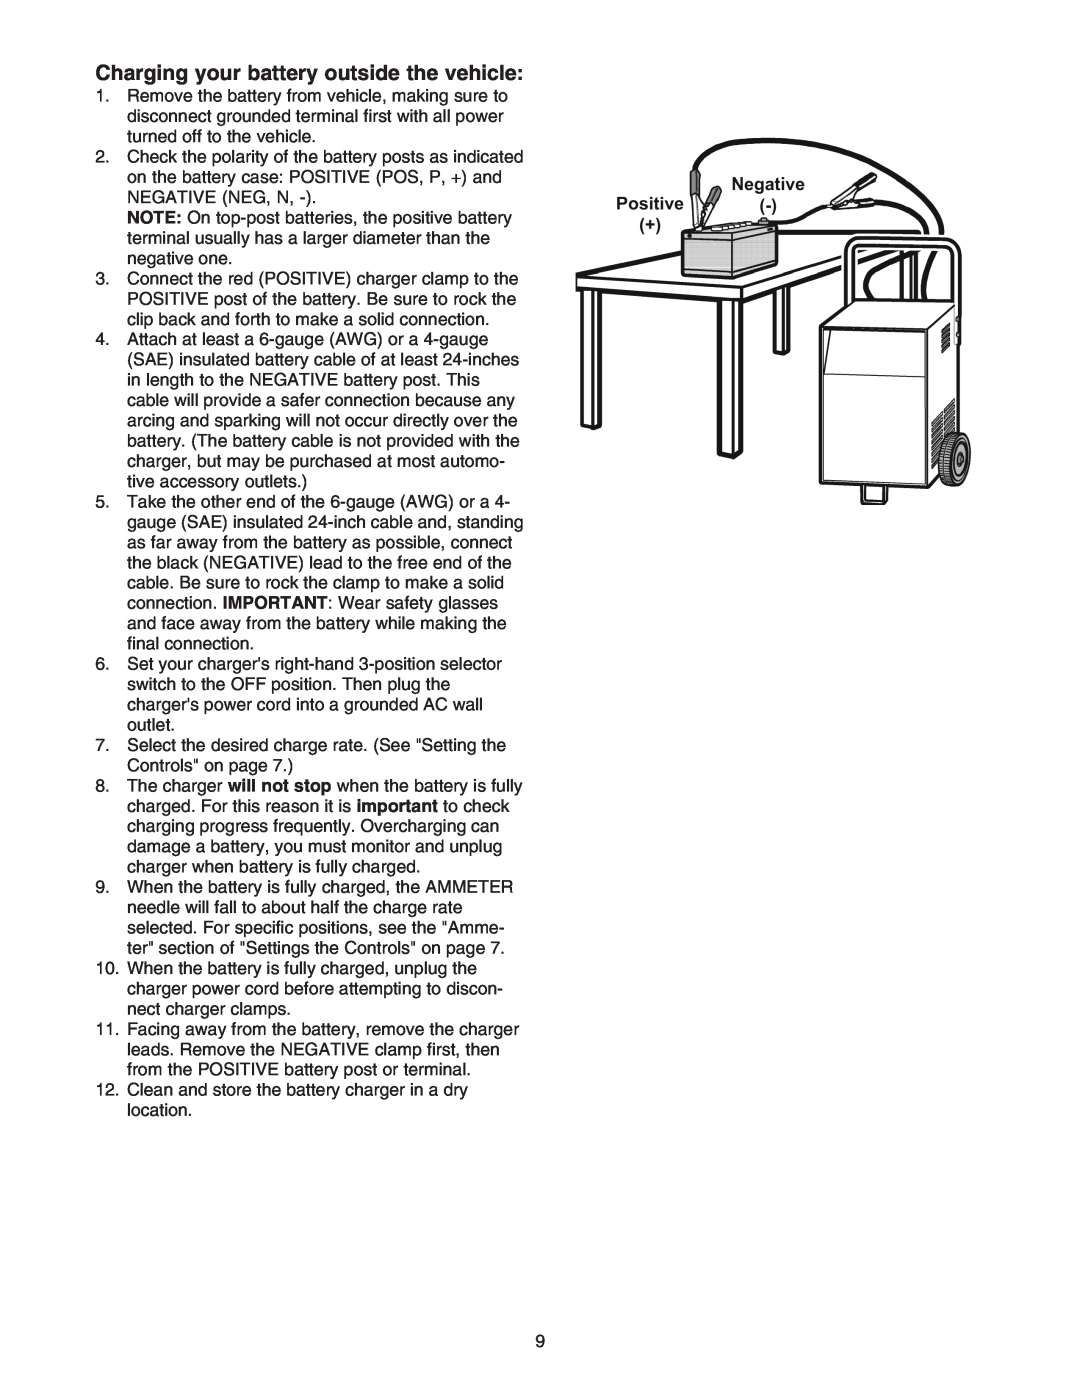 Sears 200.71231 owner manual Charging your battery outside the vehicle 